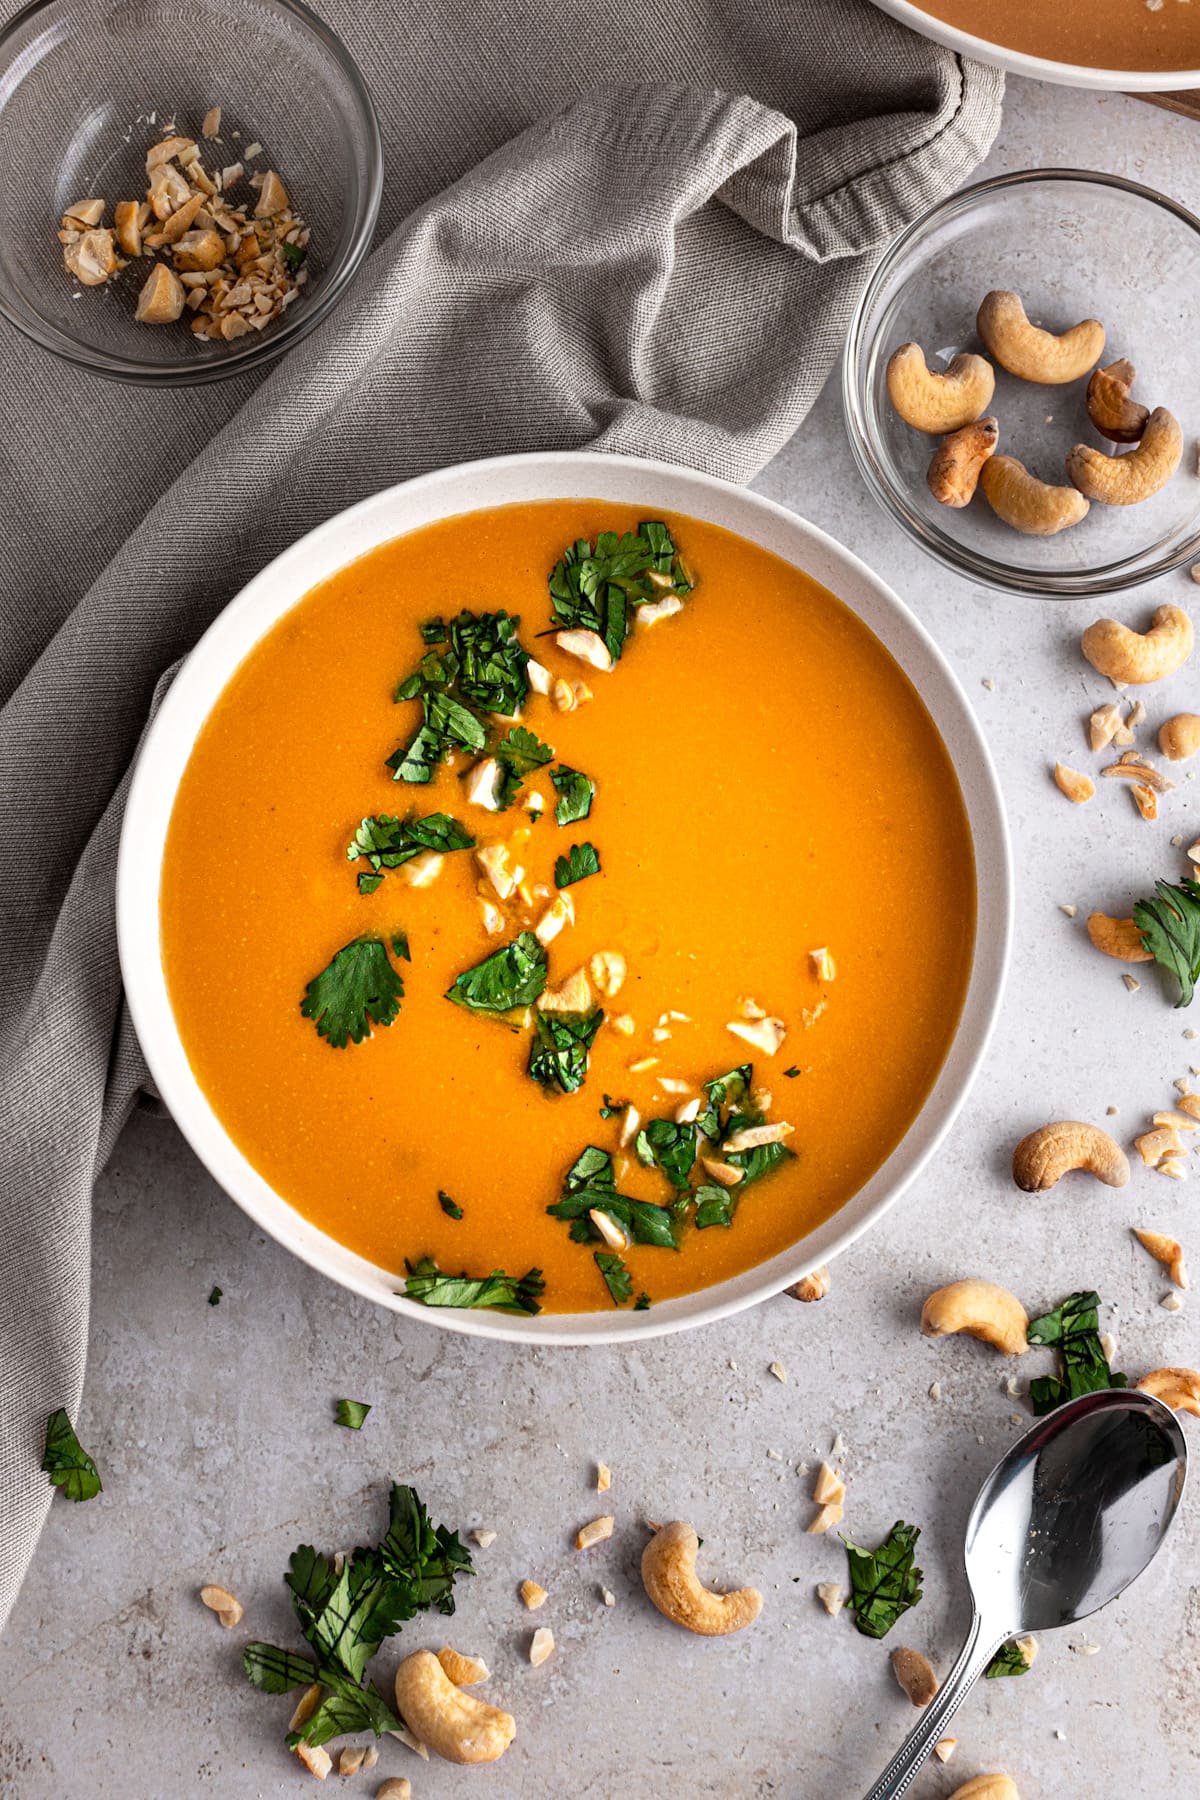 Cashew carrot ginger soup garnished with cilantro and crushed cashews, on a grey table, next to a grey napkin.